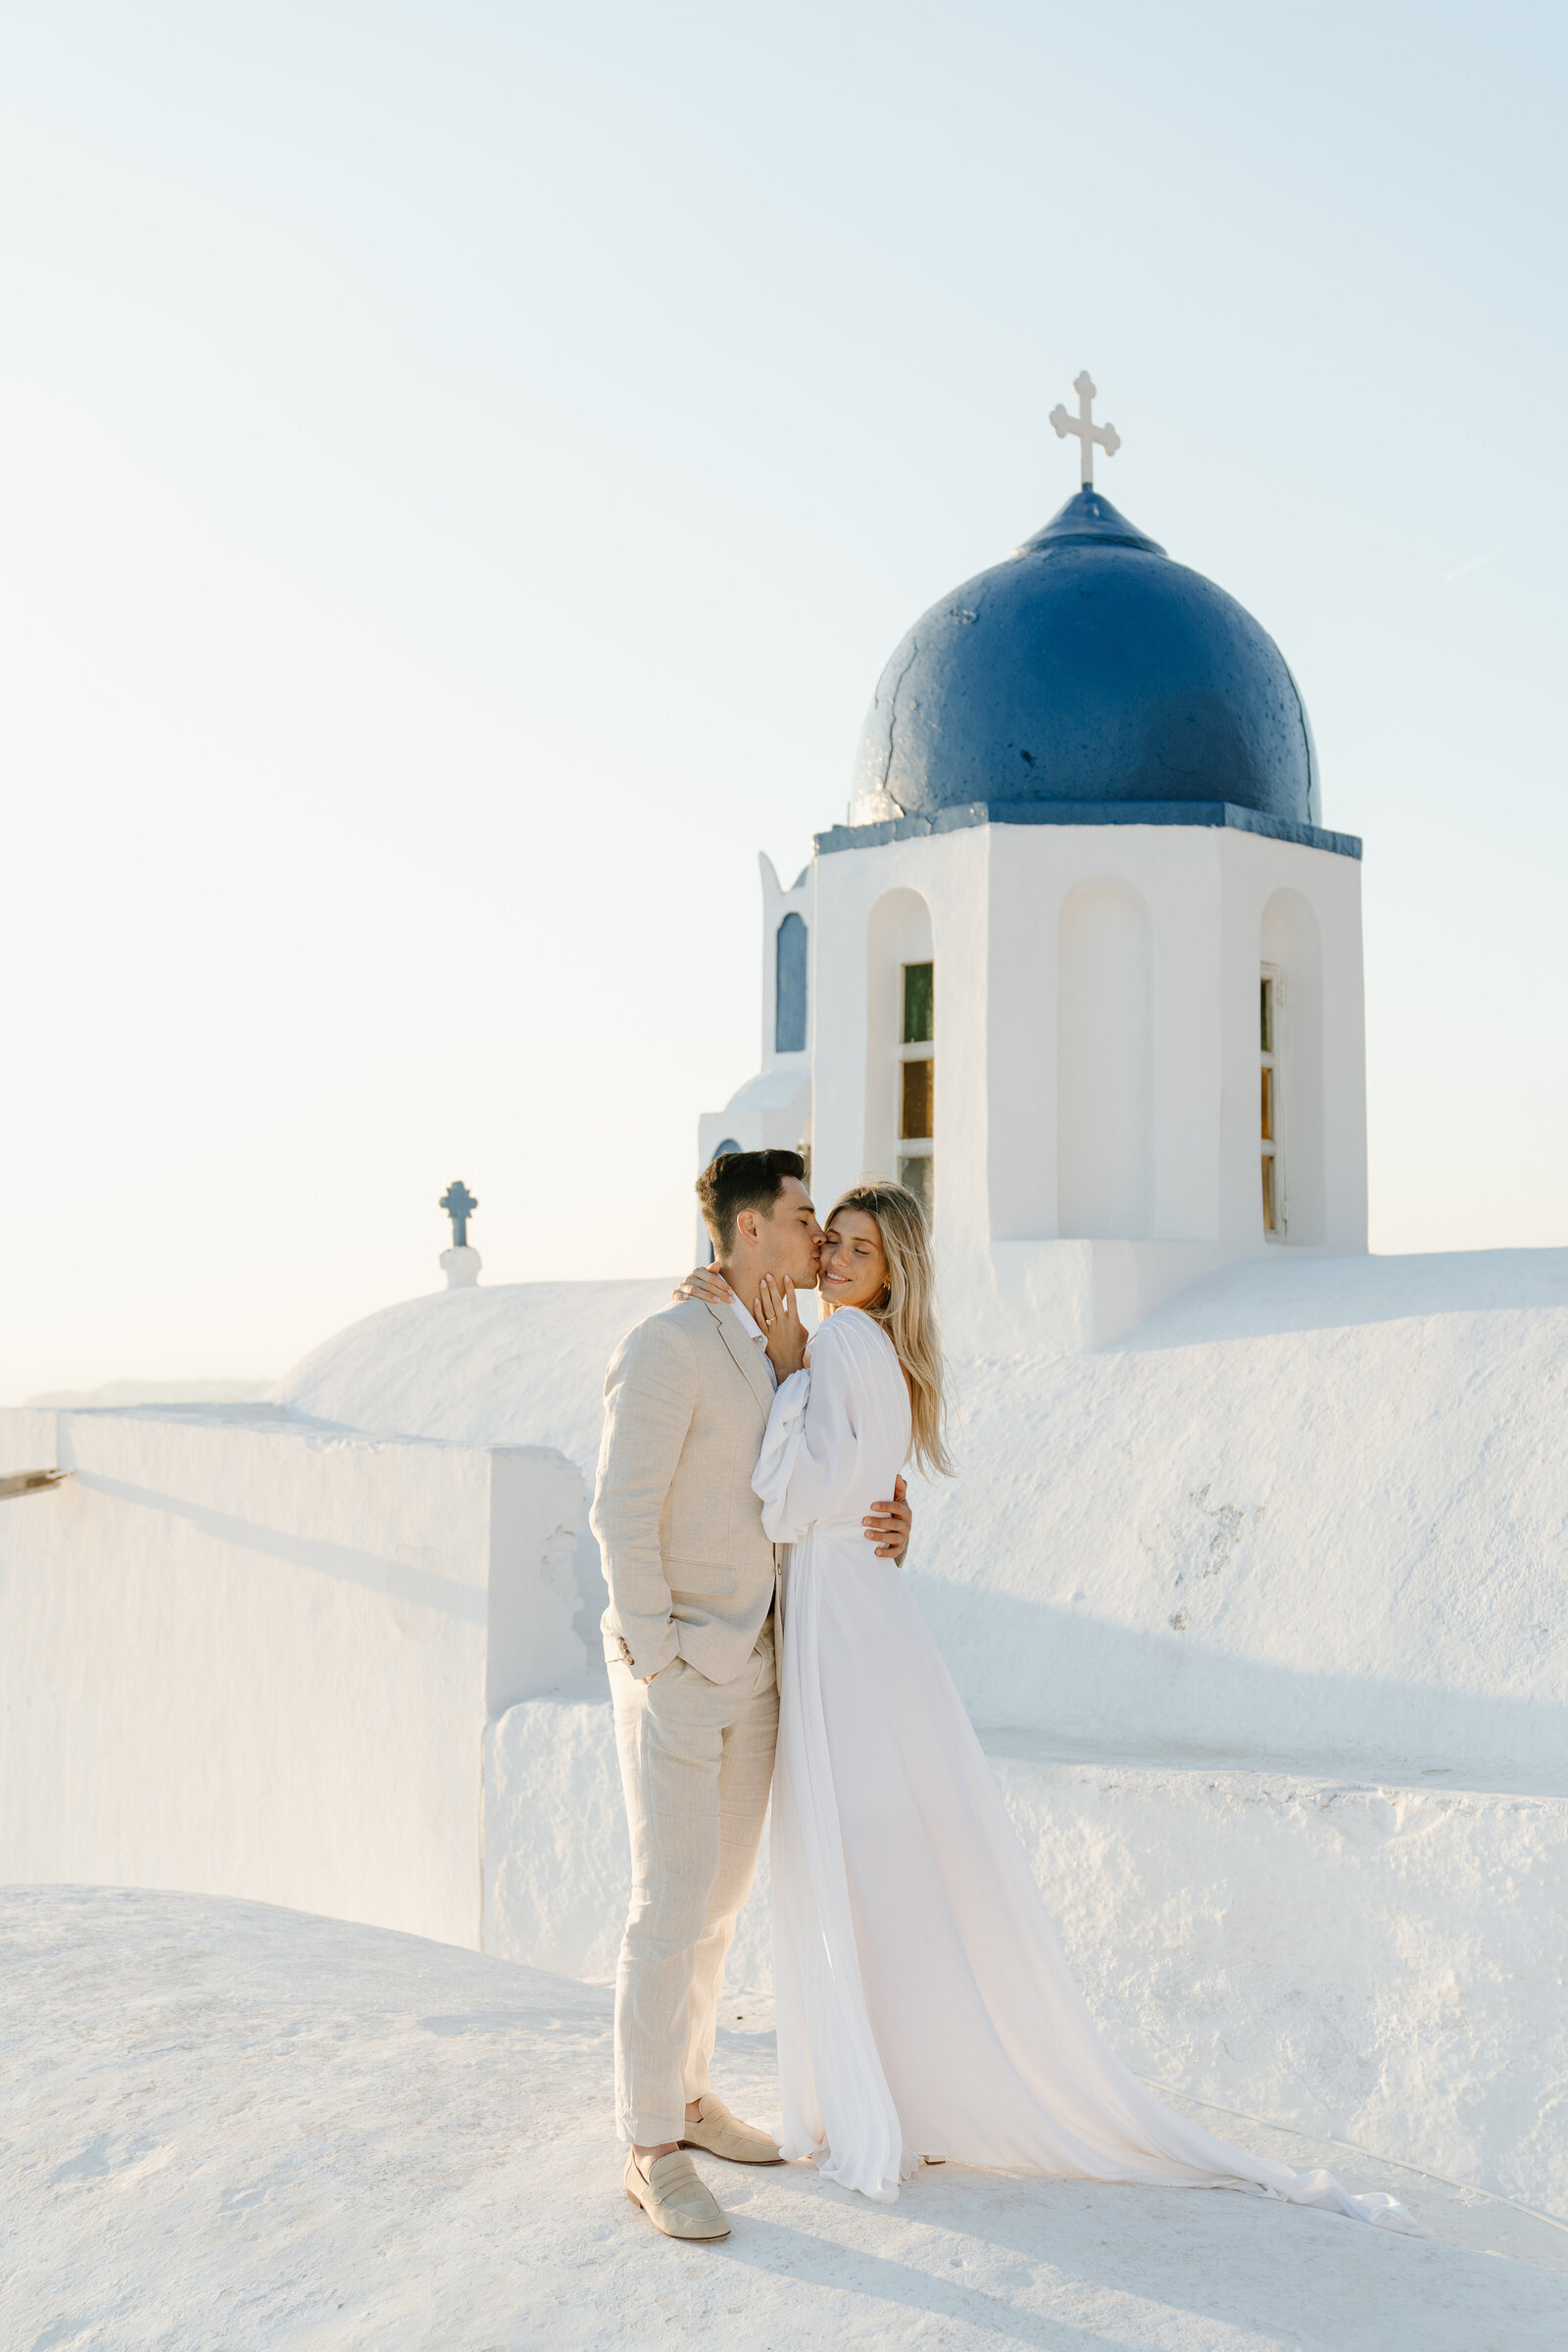 Couple dressed in wedding attire eloping on top of a white dome church on the cliffs of Santorini Greece at Sunset during golden hour.